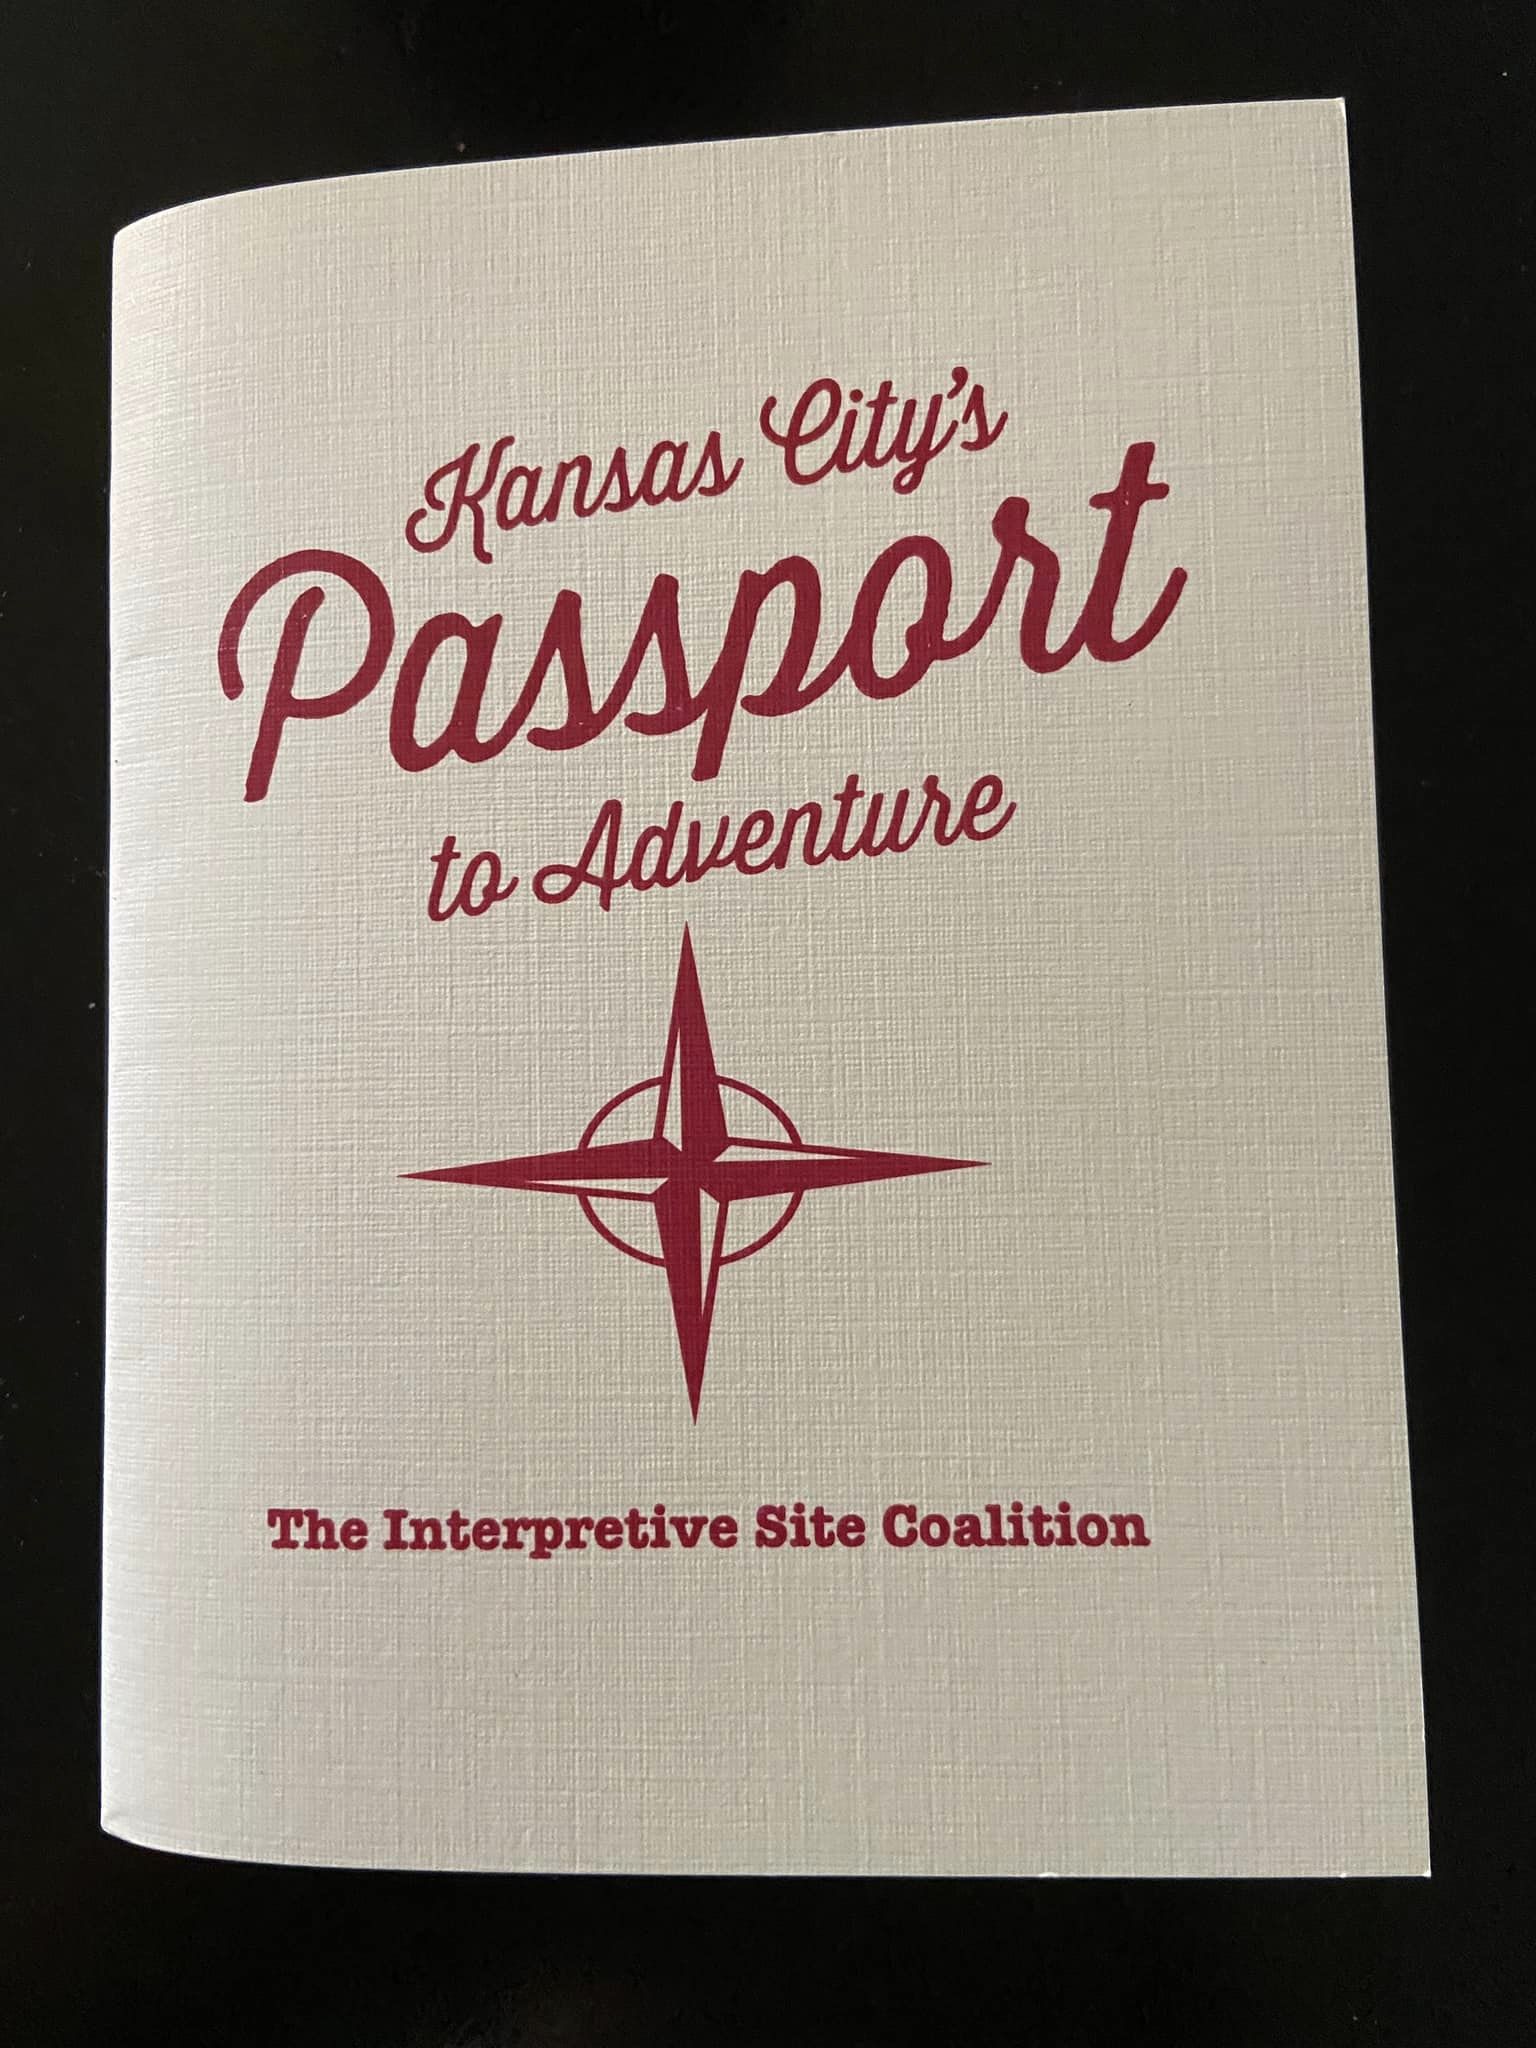 Passport book that says "Kansas City Passport to Adventure". It is sponsored by the interpretive site coalition. 